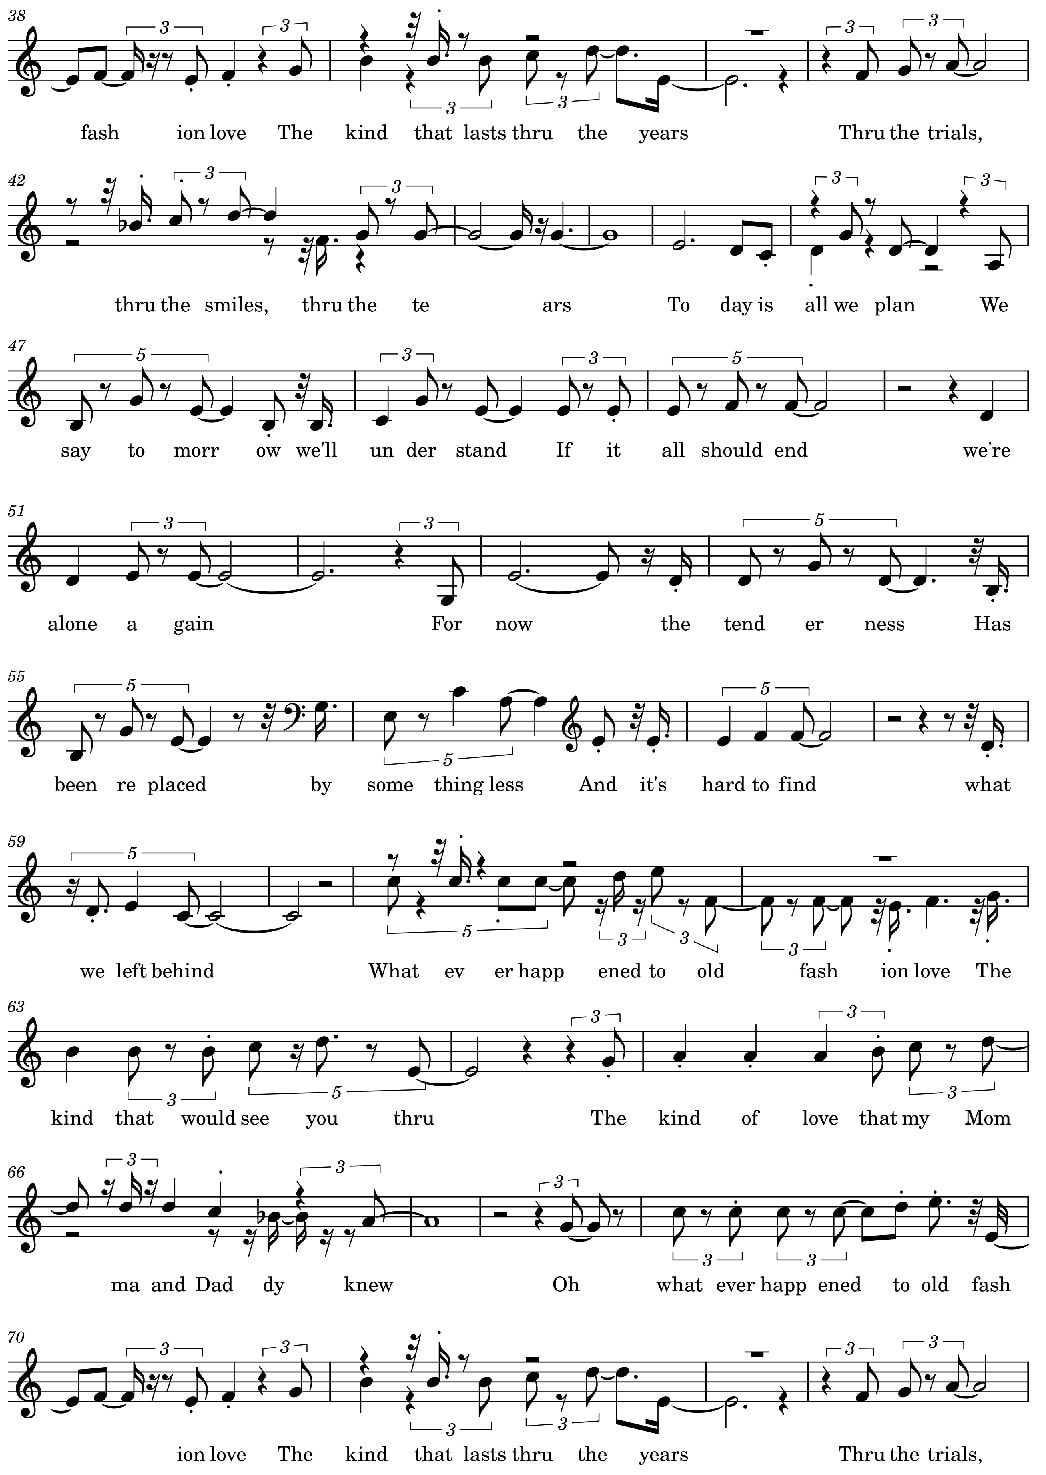 Whatever Happened To Old Fashioned Love Sheet Music part two